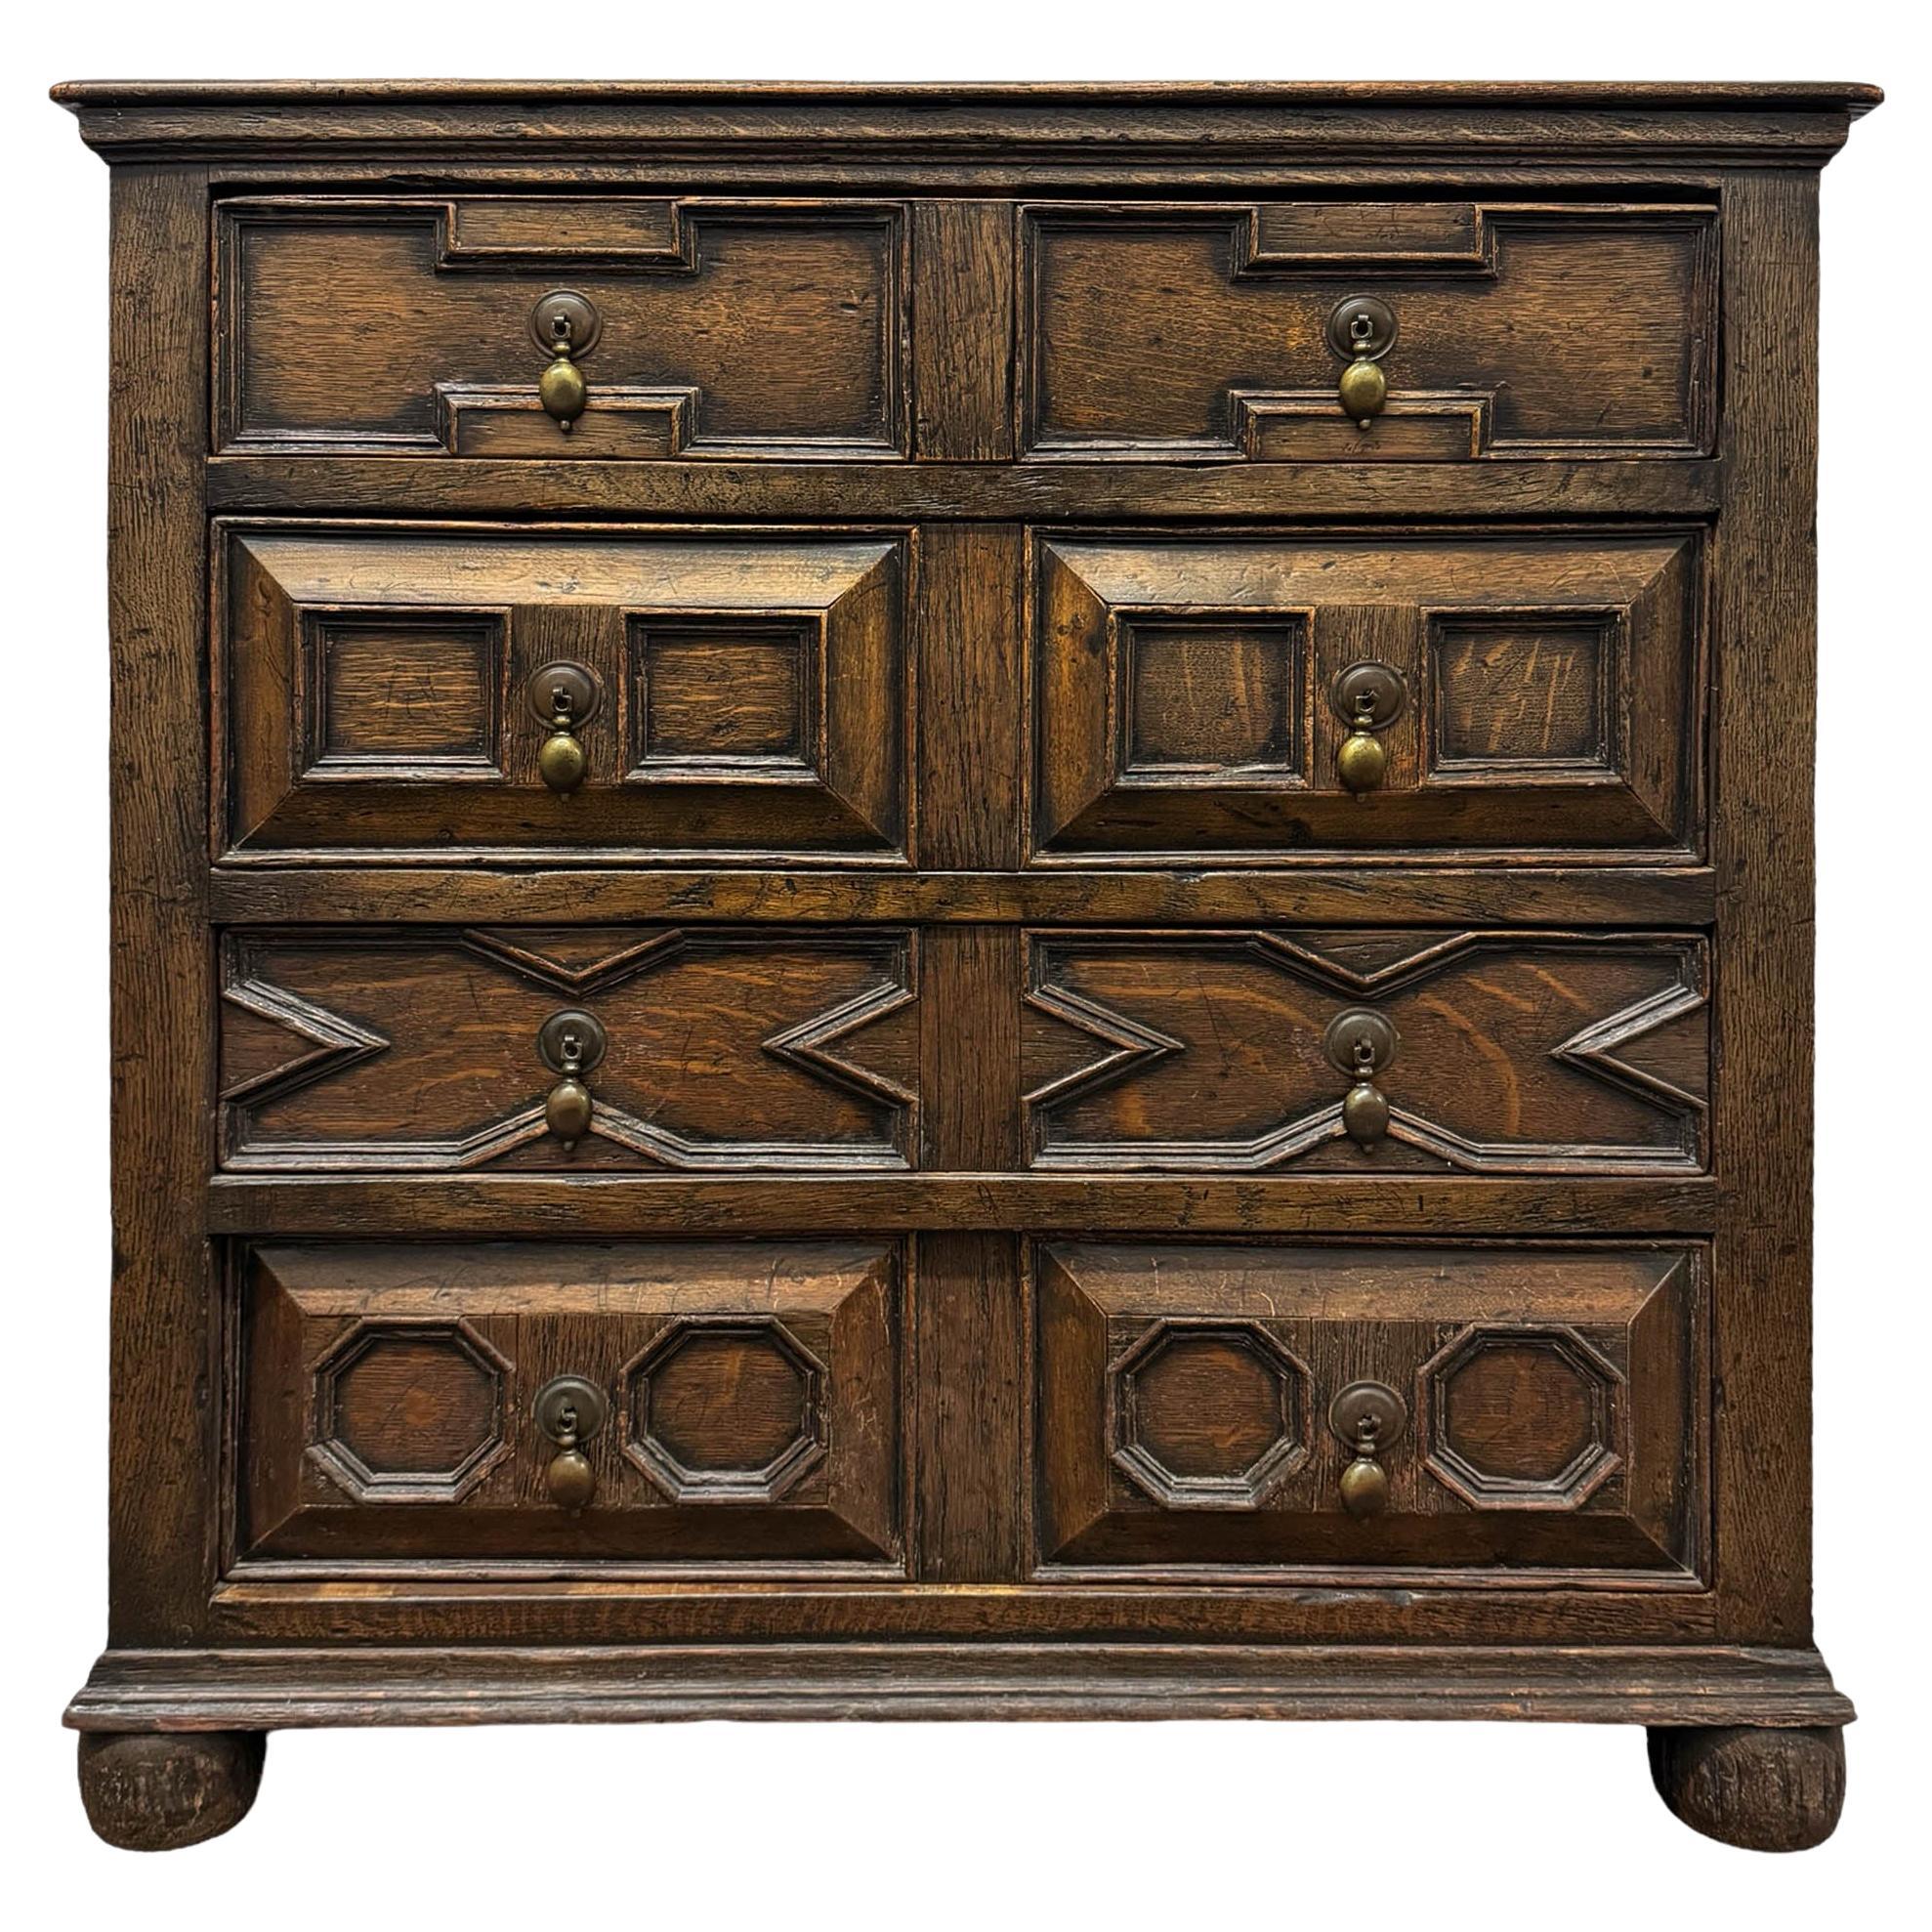 19th Century English William and Mary-Style Chest of Drawers